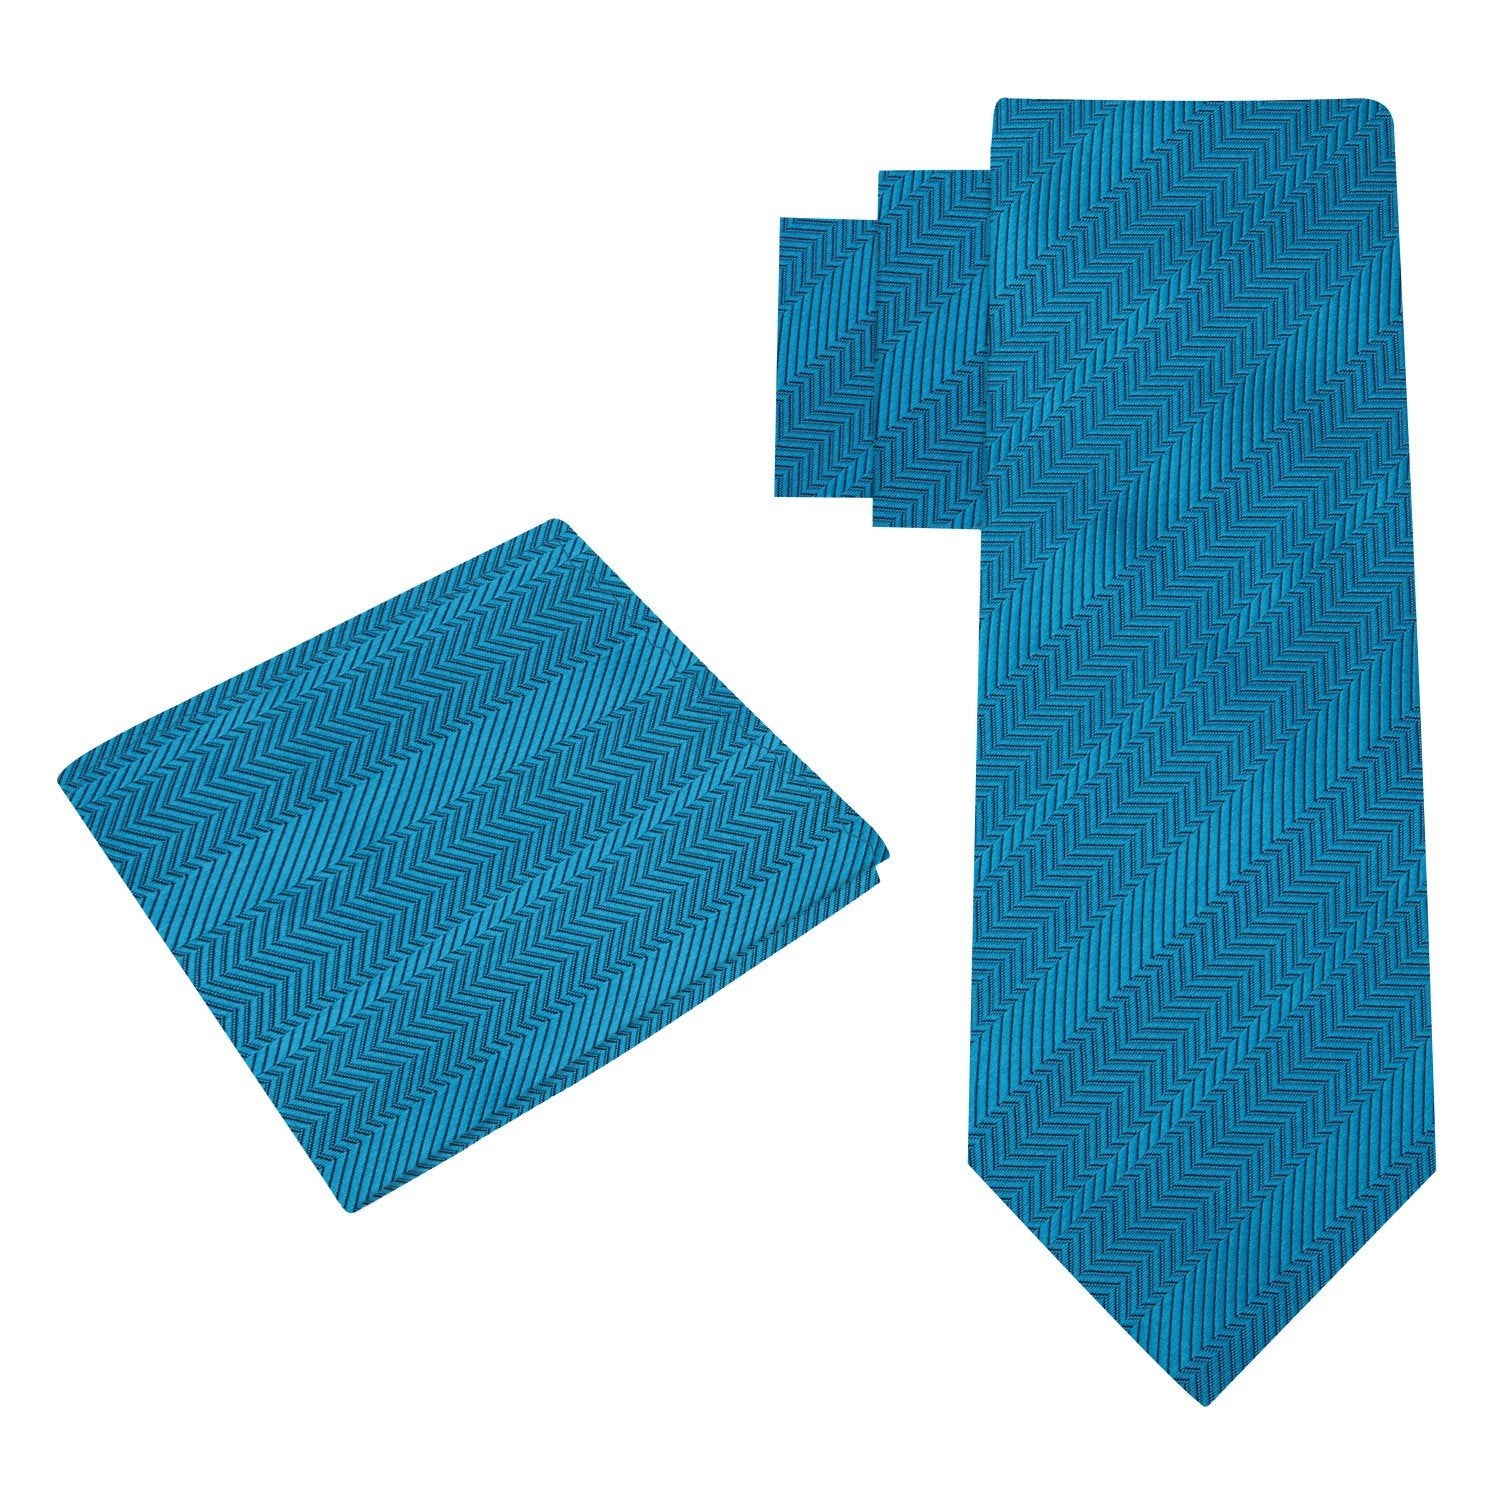 Alt View: Rich Teal Tie and Pocket Square